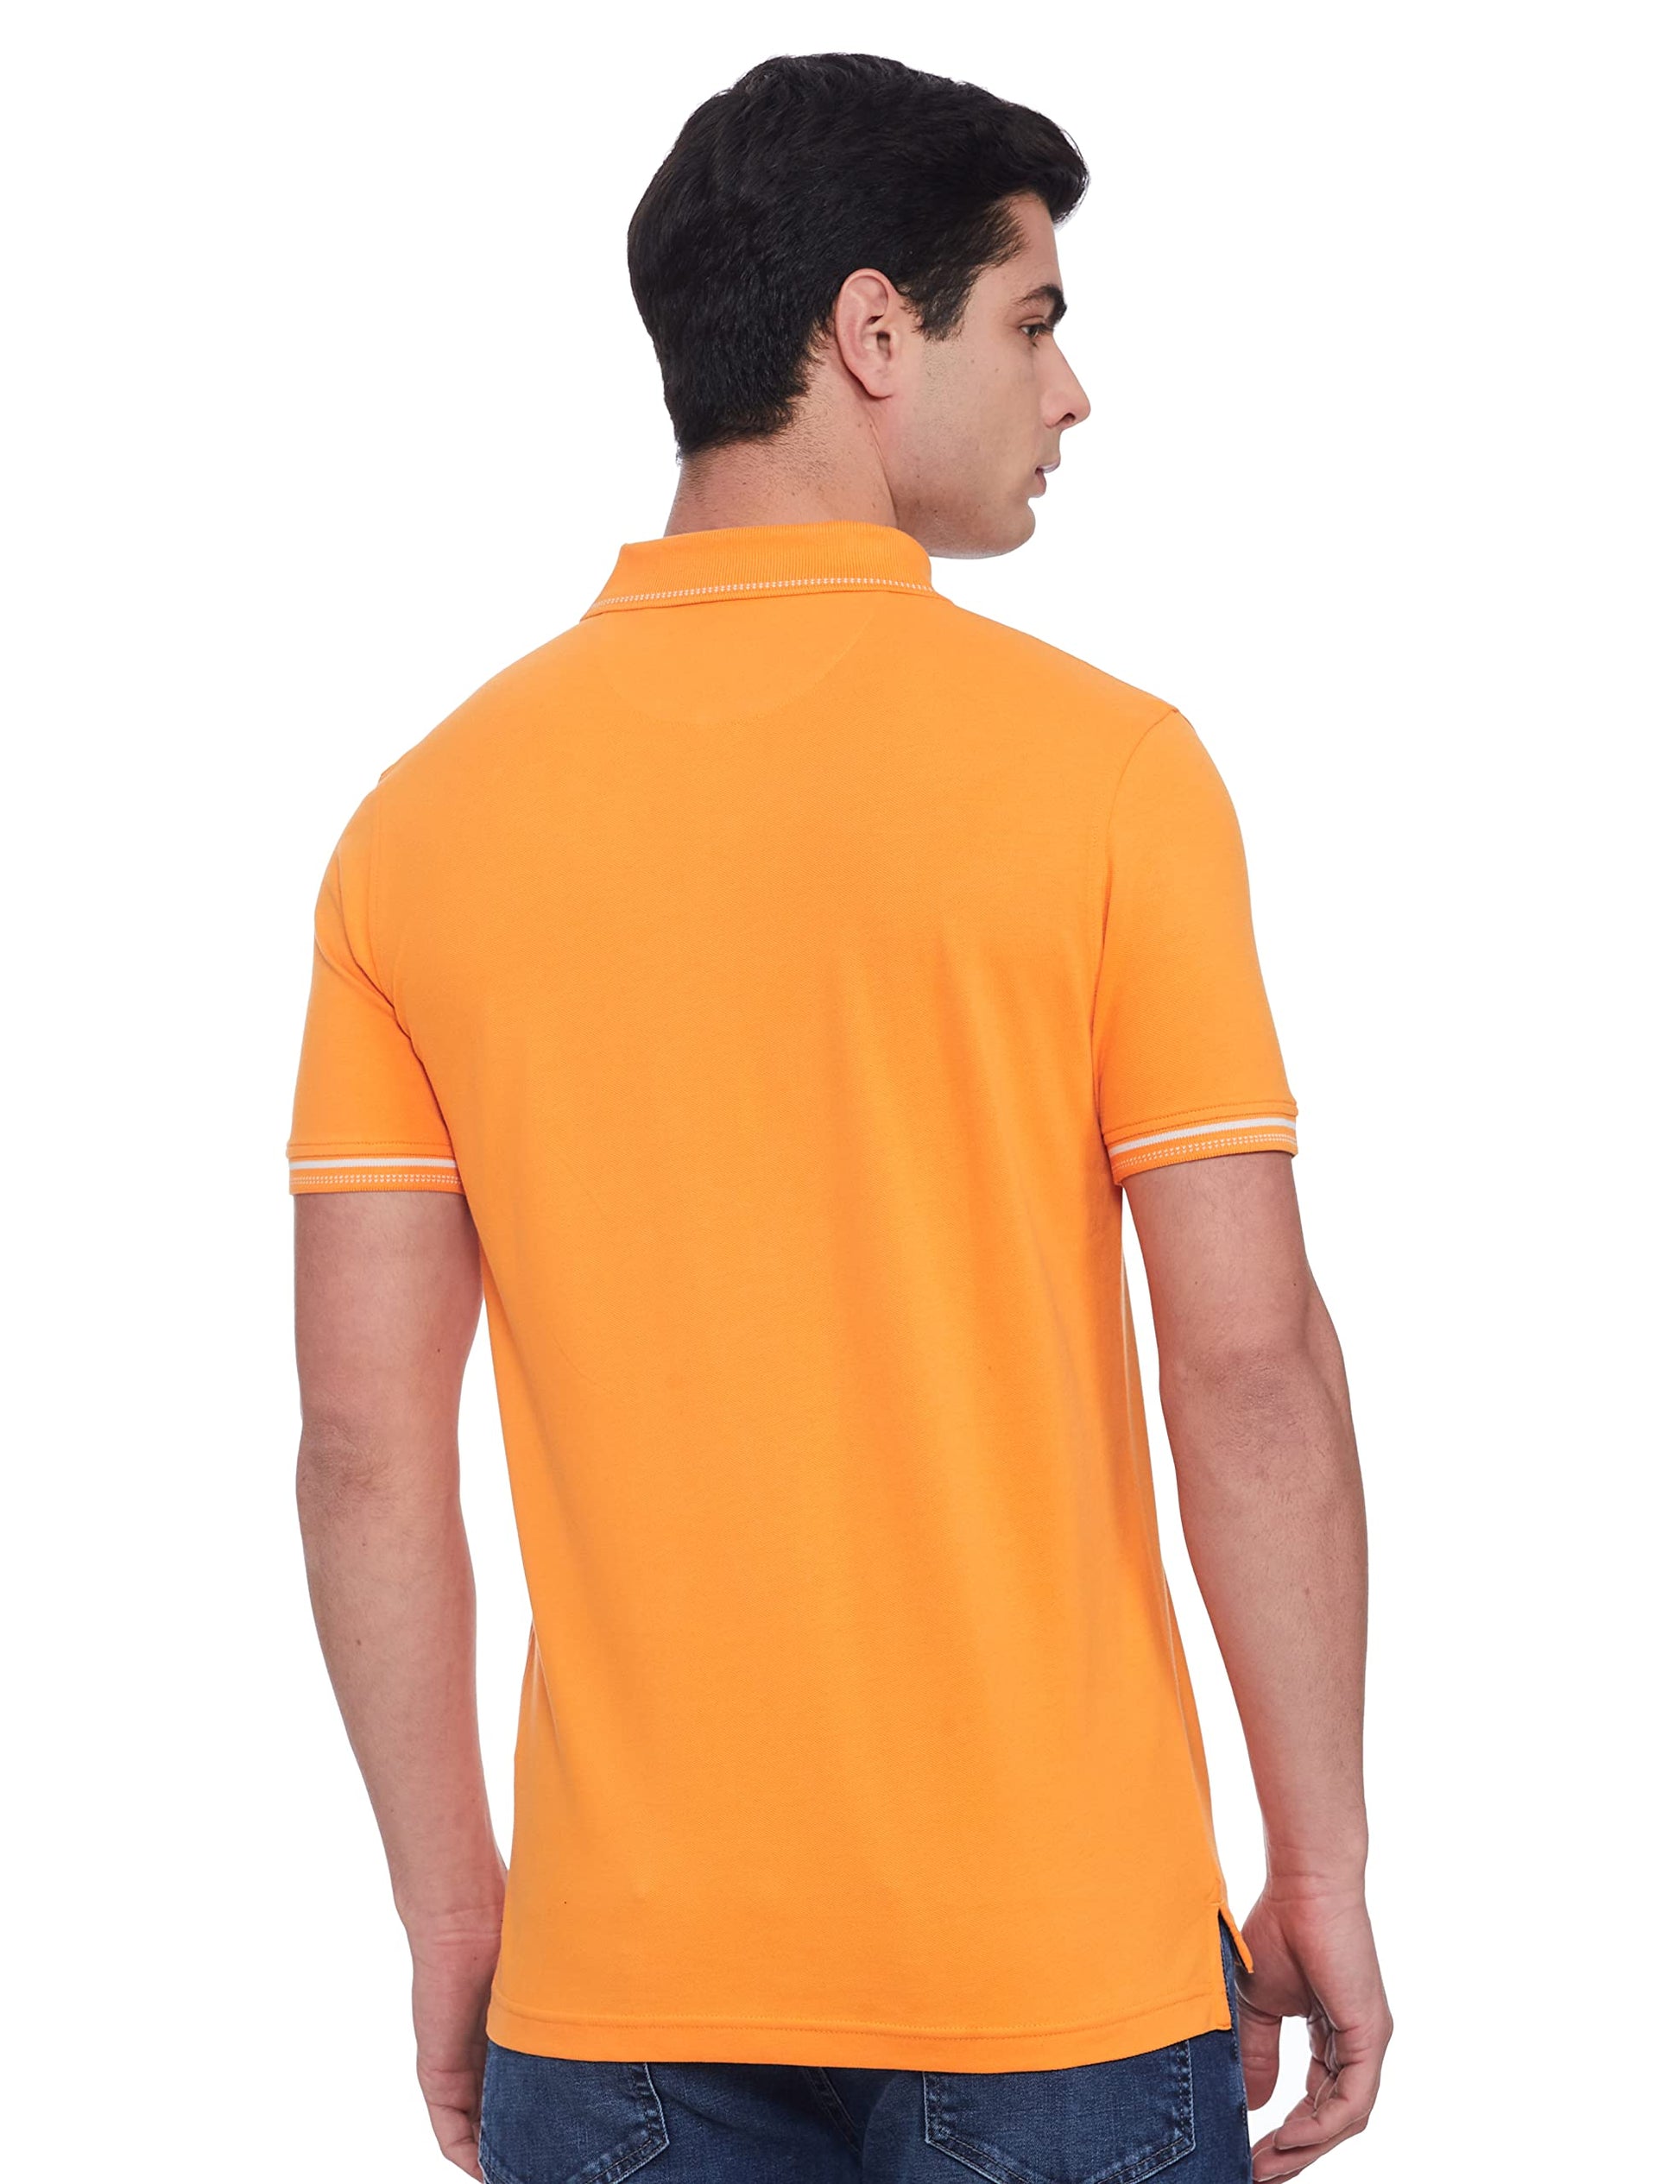 Arrow Sports Solid Polo T-Shirt Yellow 